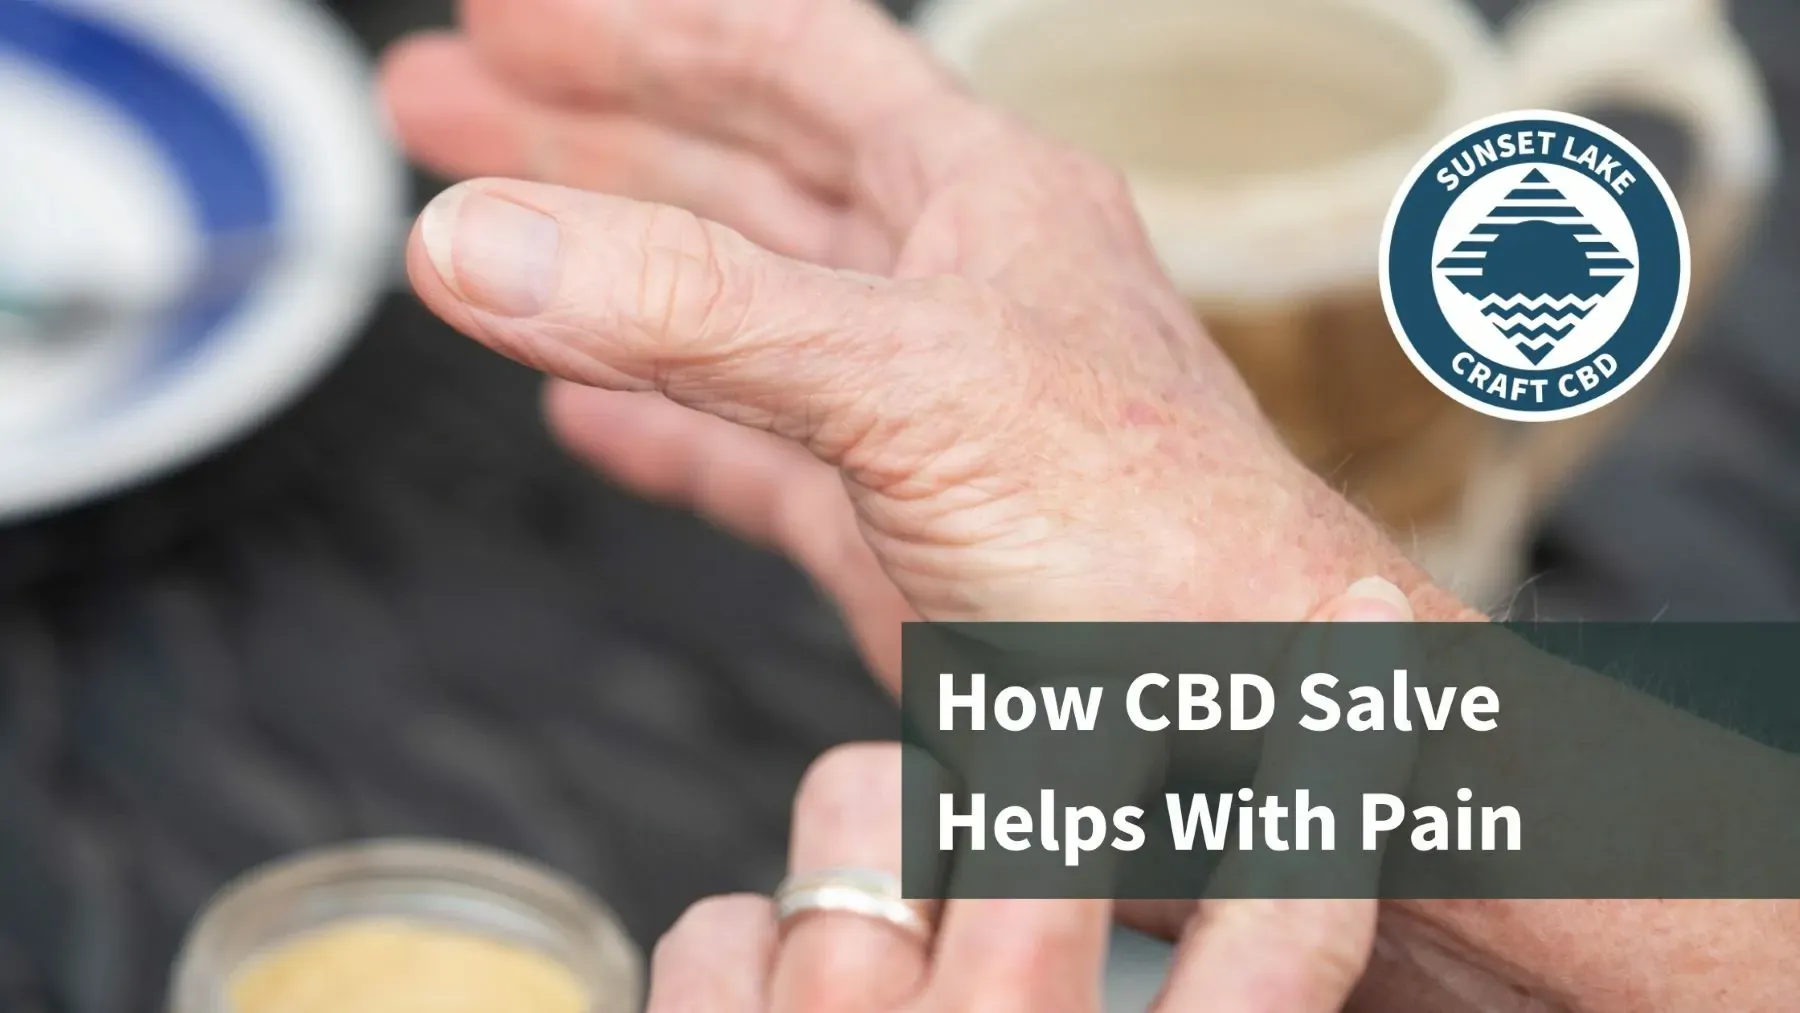 Two hands applying CBD salve. Text reads "How CBD Salve Helps With Pain"